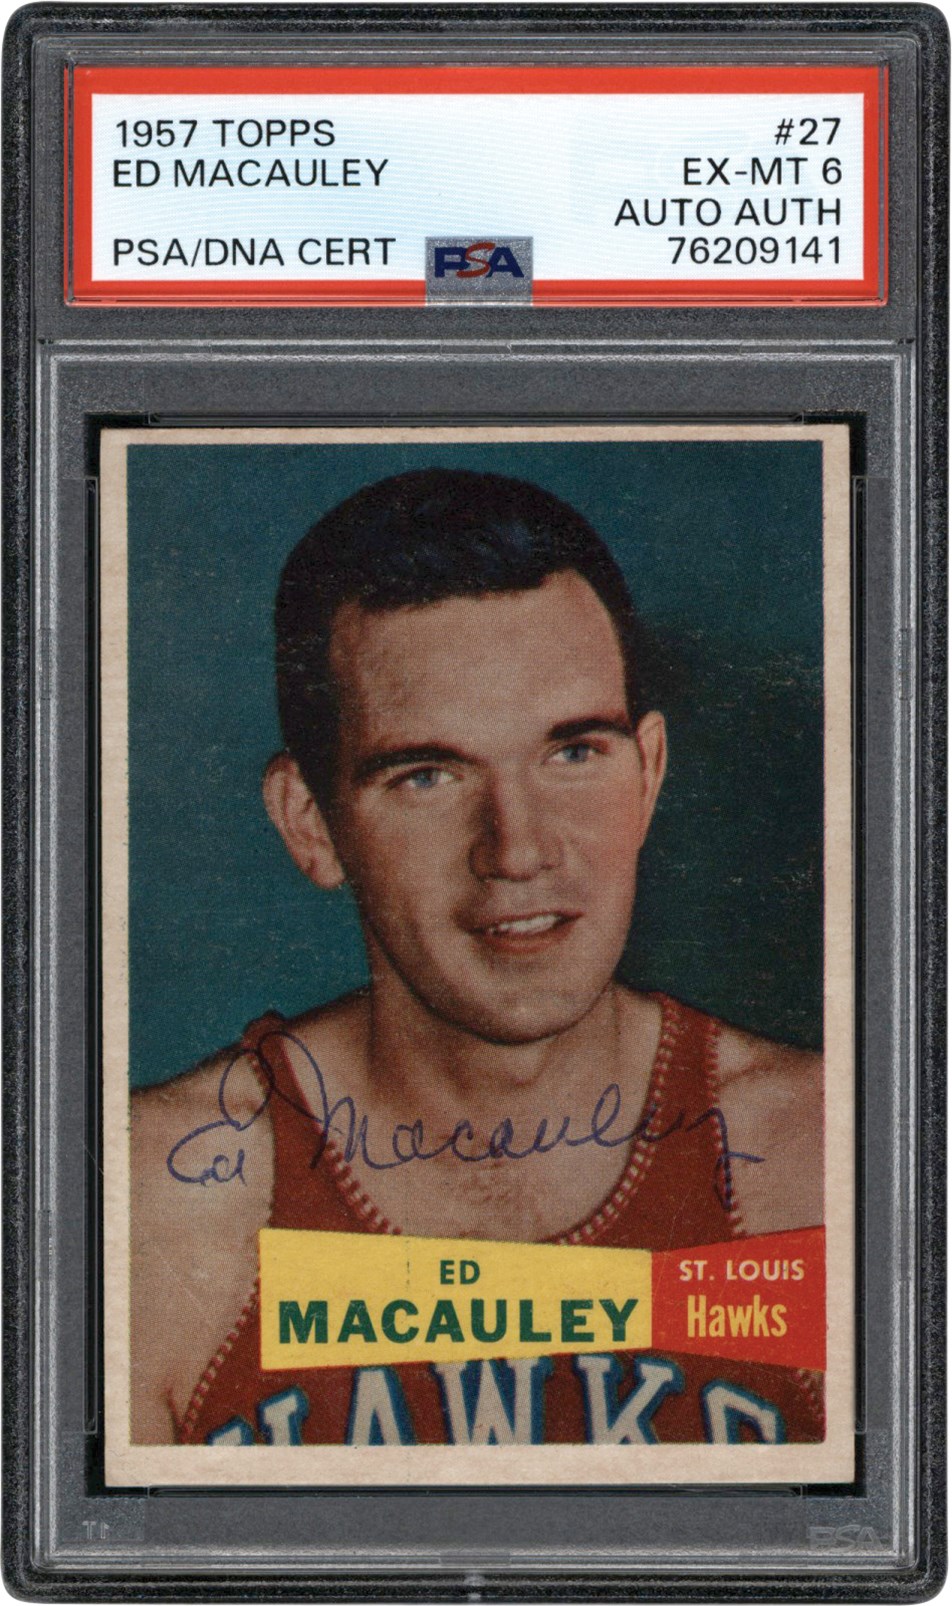 Basketball Cards - 1957 Topps Basketball #27 Ed Macauley Signed Rookie Card PSA EX-MT 6 Auto Auth (Pop 1 of 2 - Highest Graded)